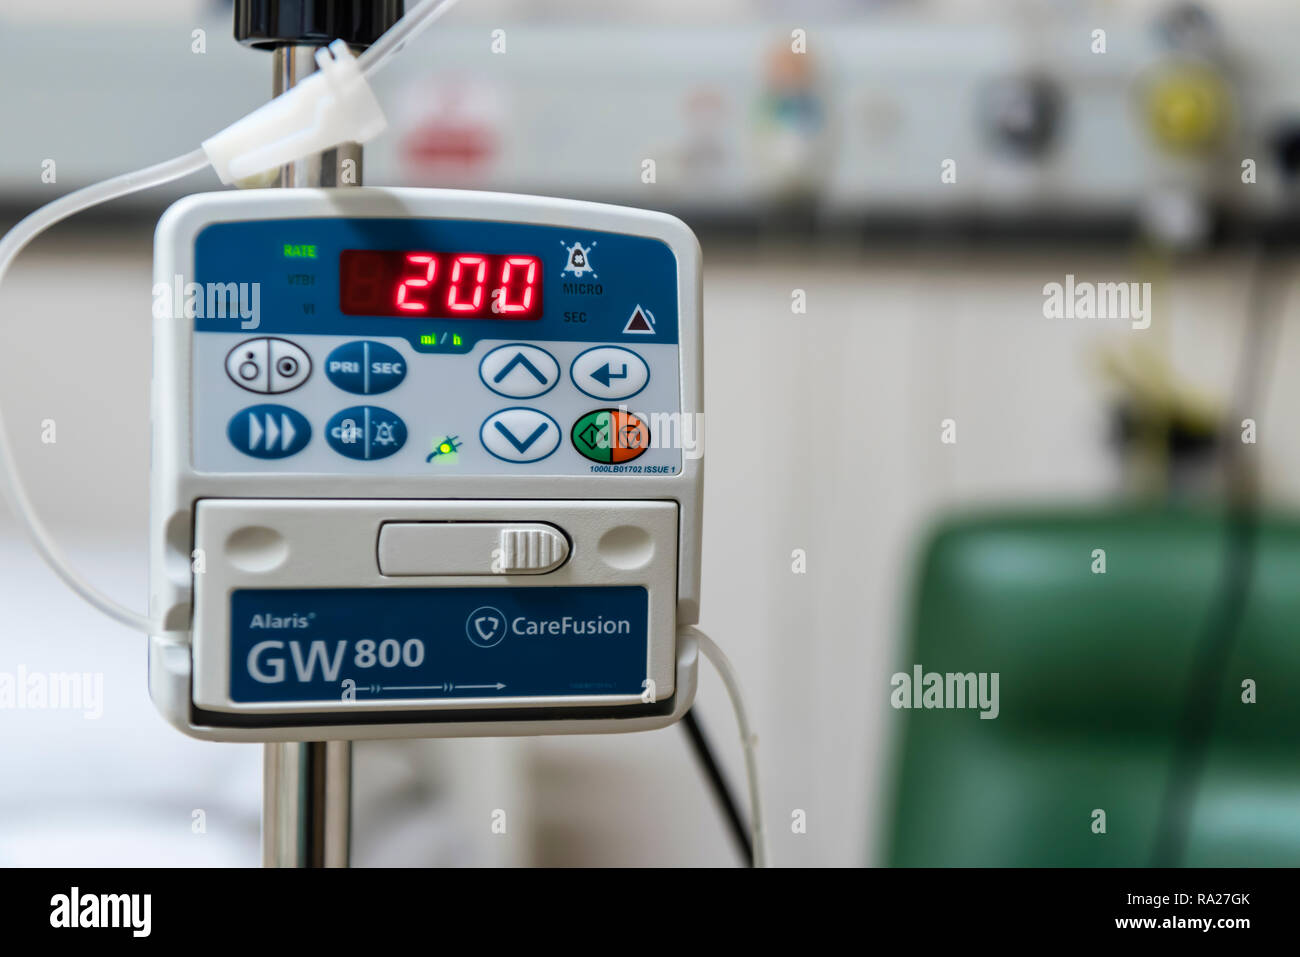 Drip infusion pump in a hospital ward, used to deliver controlled doses of fluids and medicines. Stock Photo